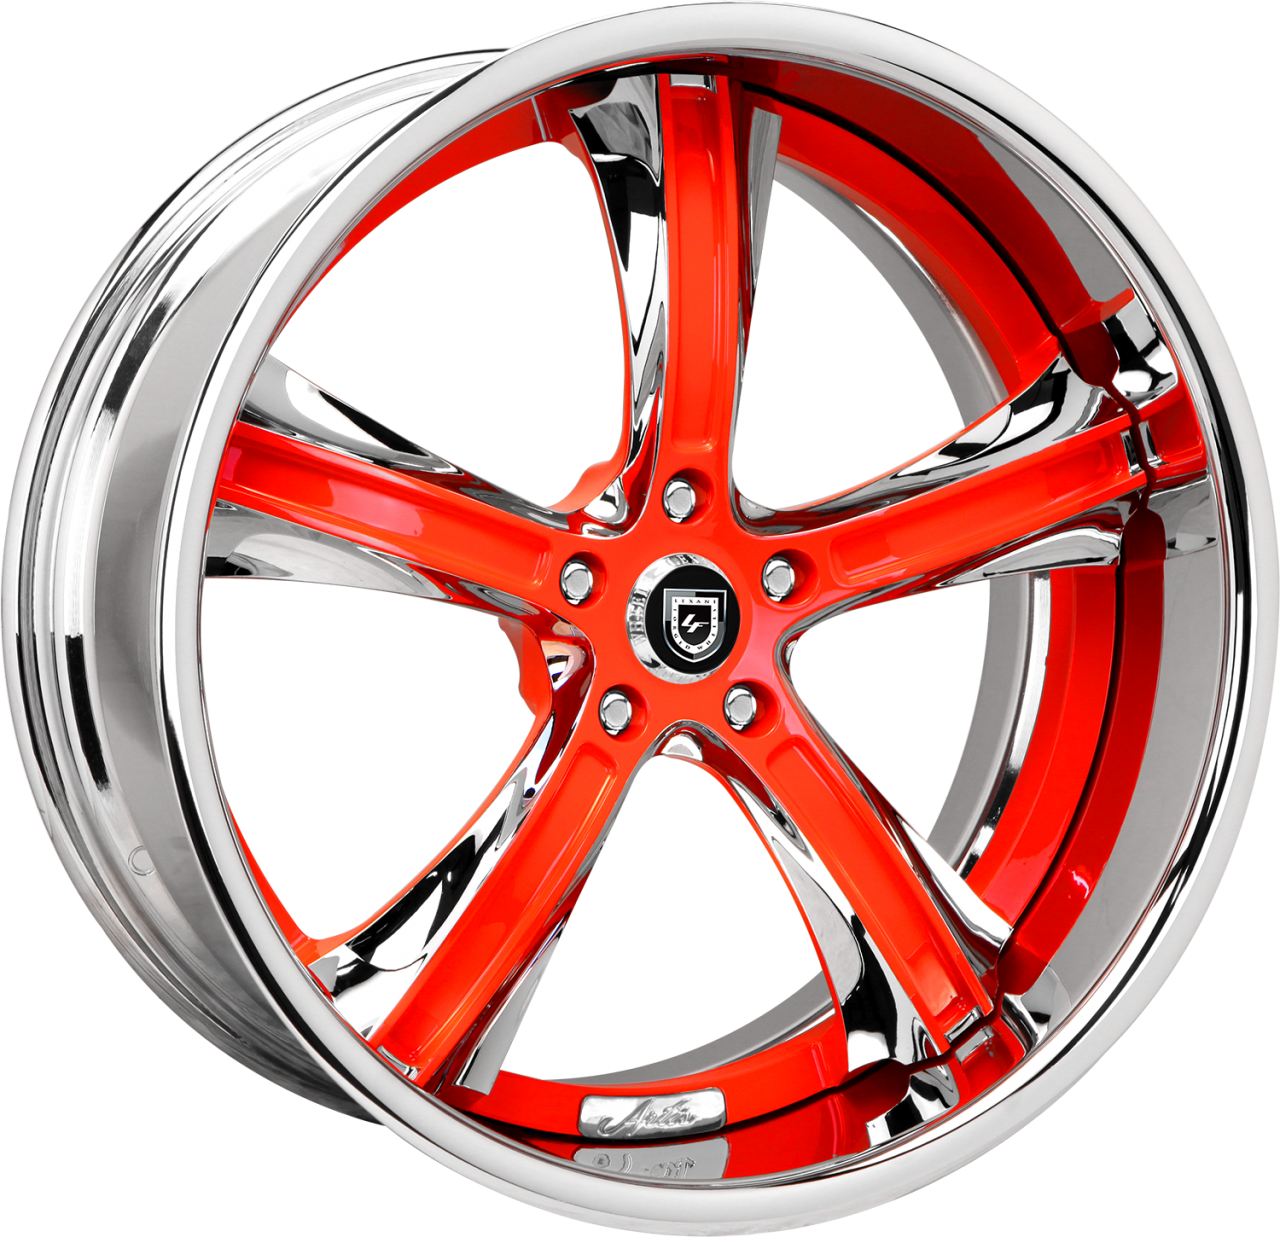 Artis Forged Nouveau wheel with Custom finish